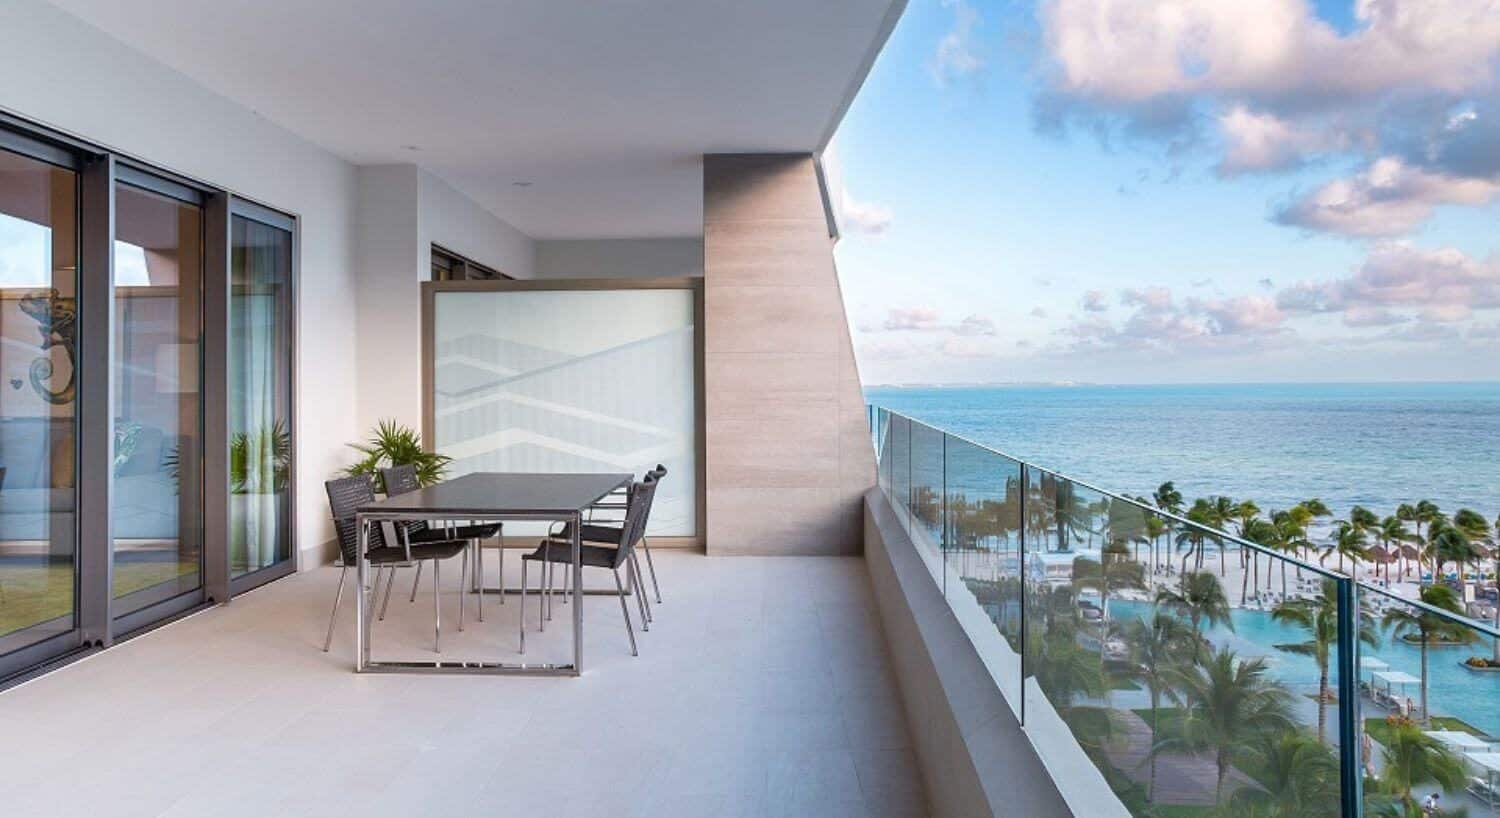 A private balcony with table and chairs, and views of the ocean pools, palm trees, sandy beach, and ocean.